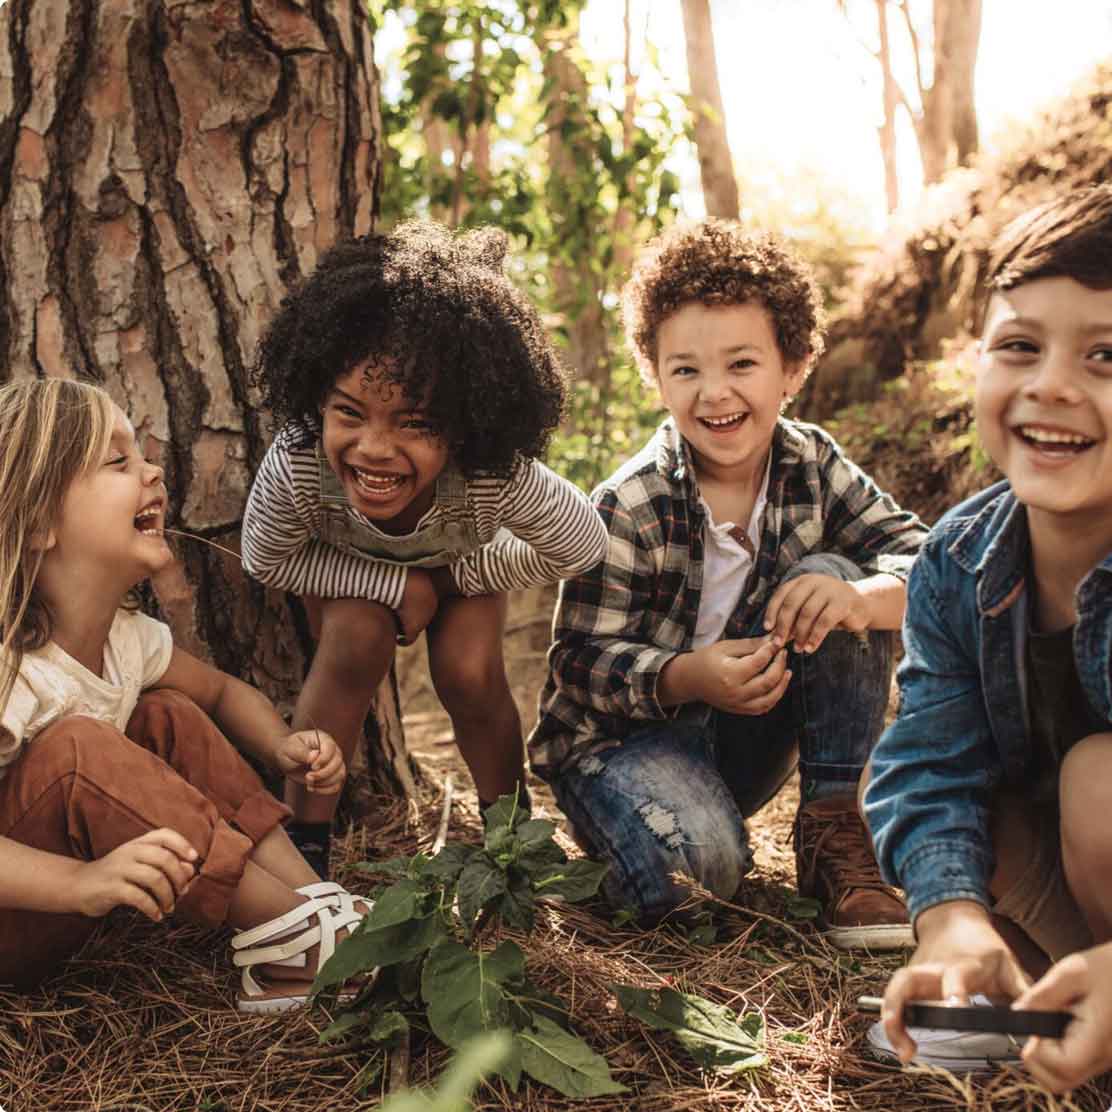 Children laughing and playing in the woods